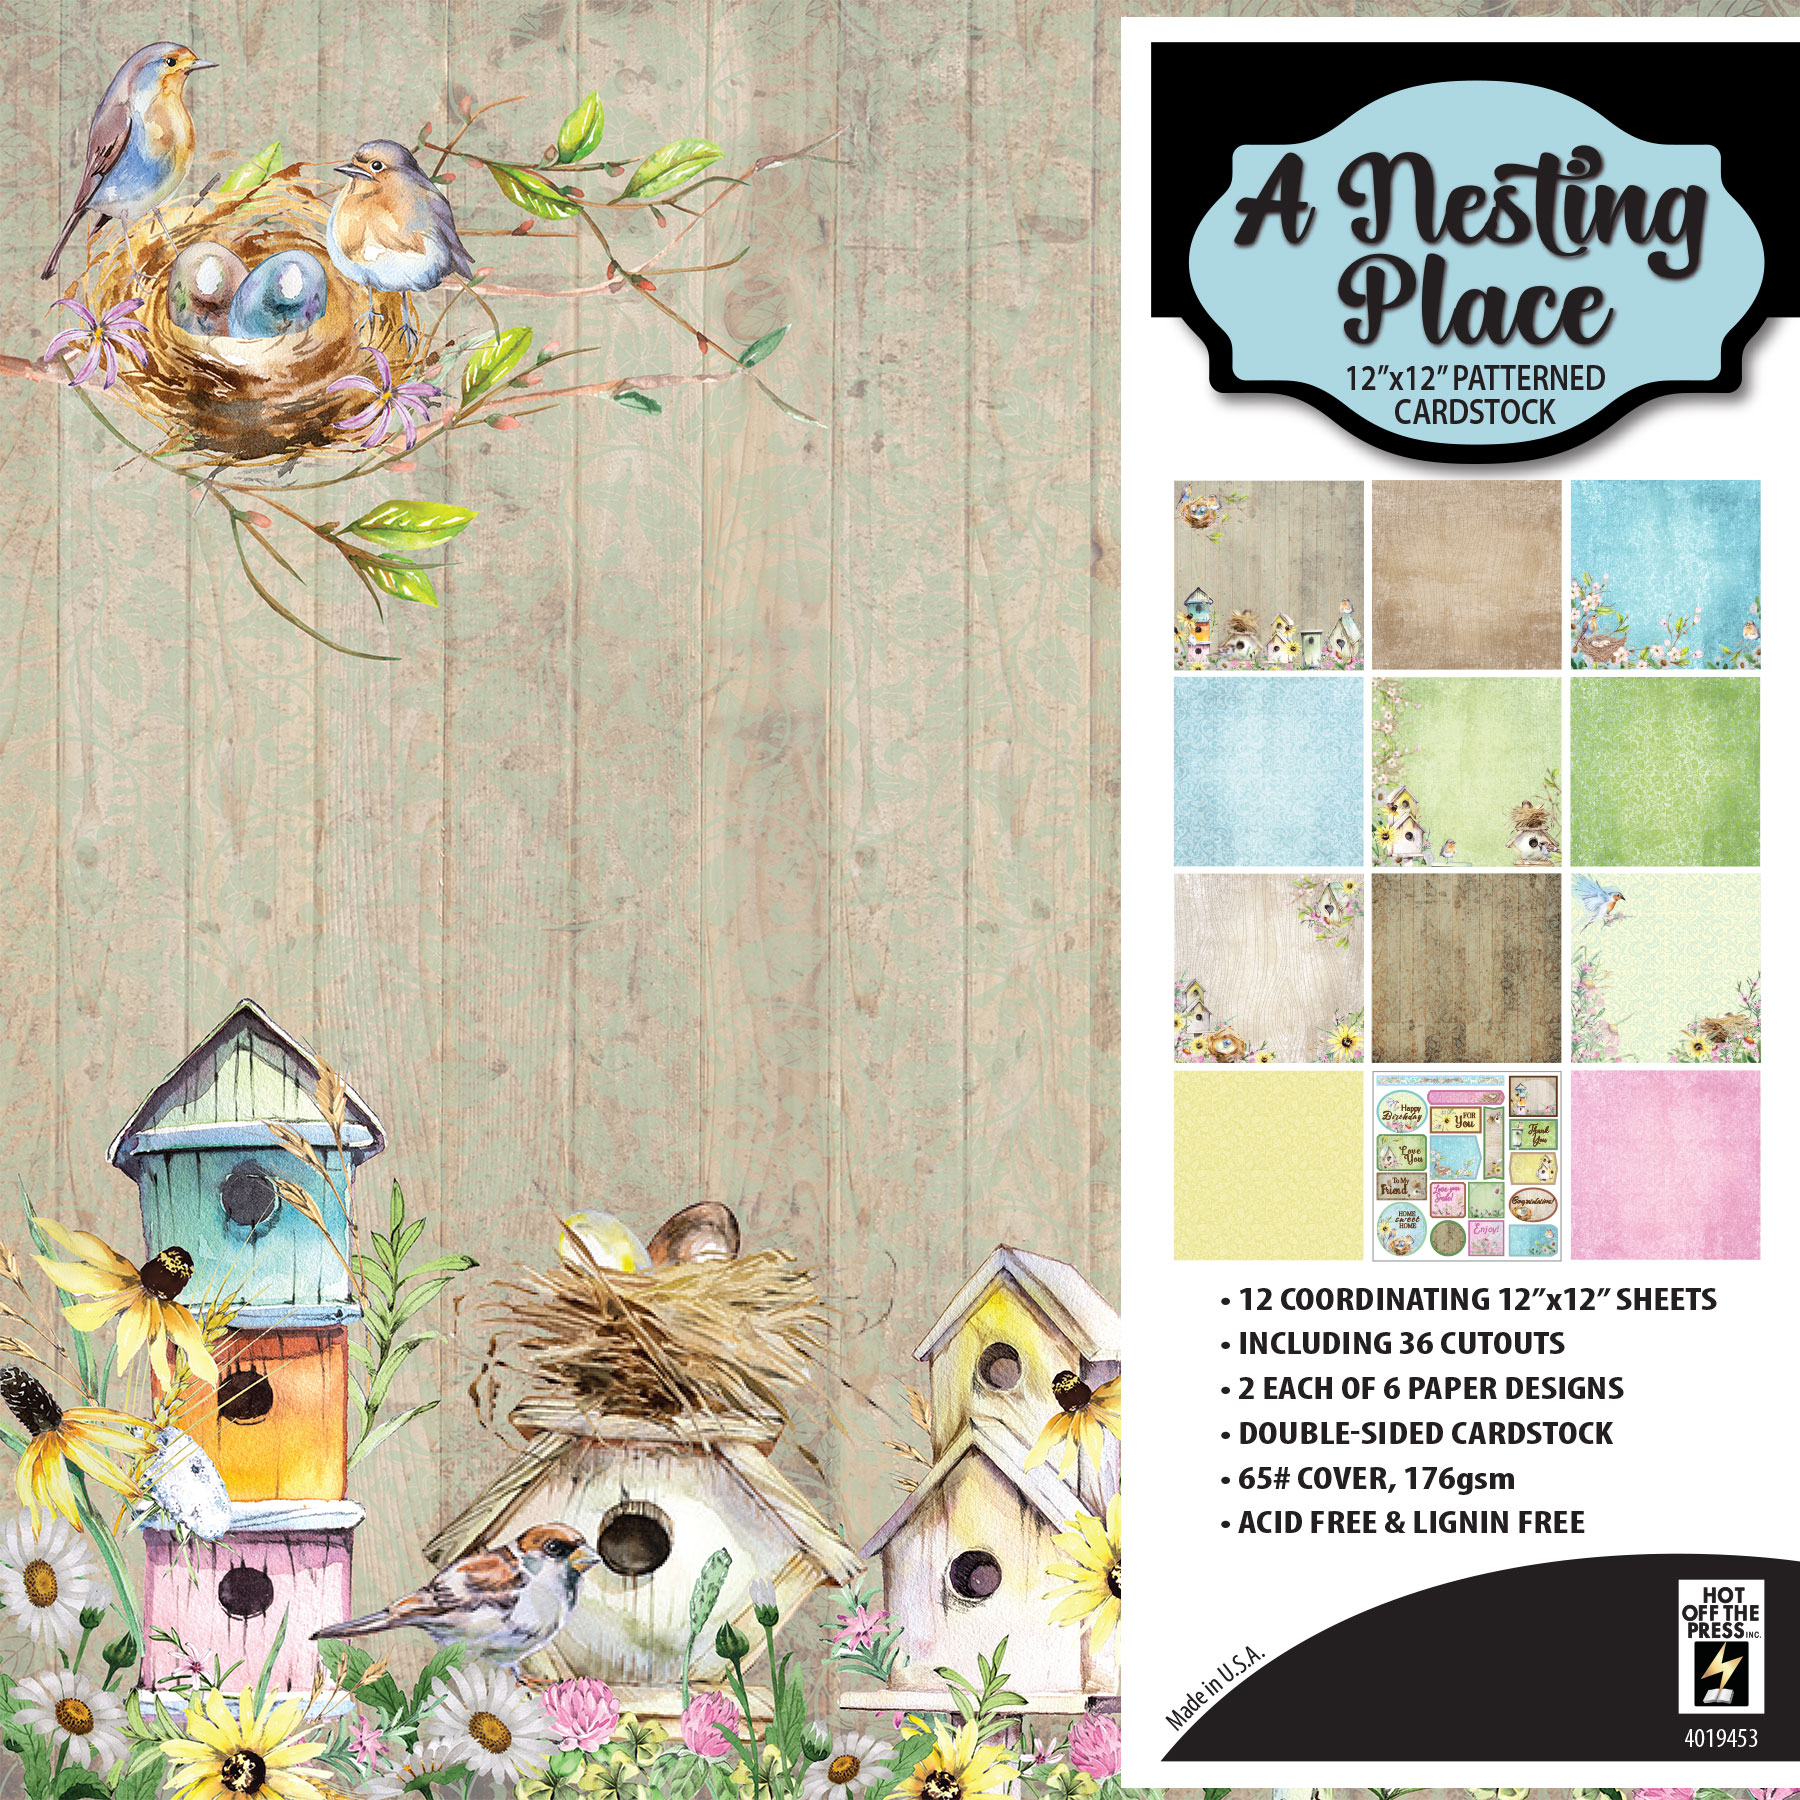 A Nesting Place Patterned Cardstock, 12"x12"